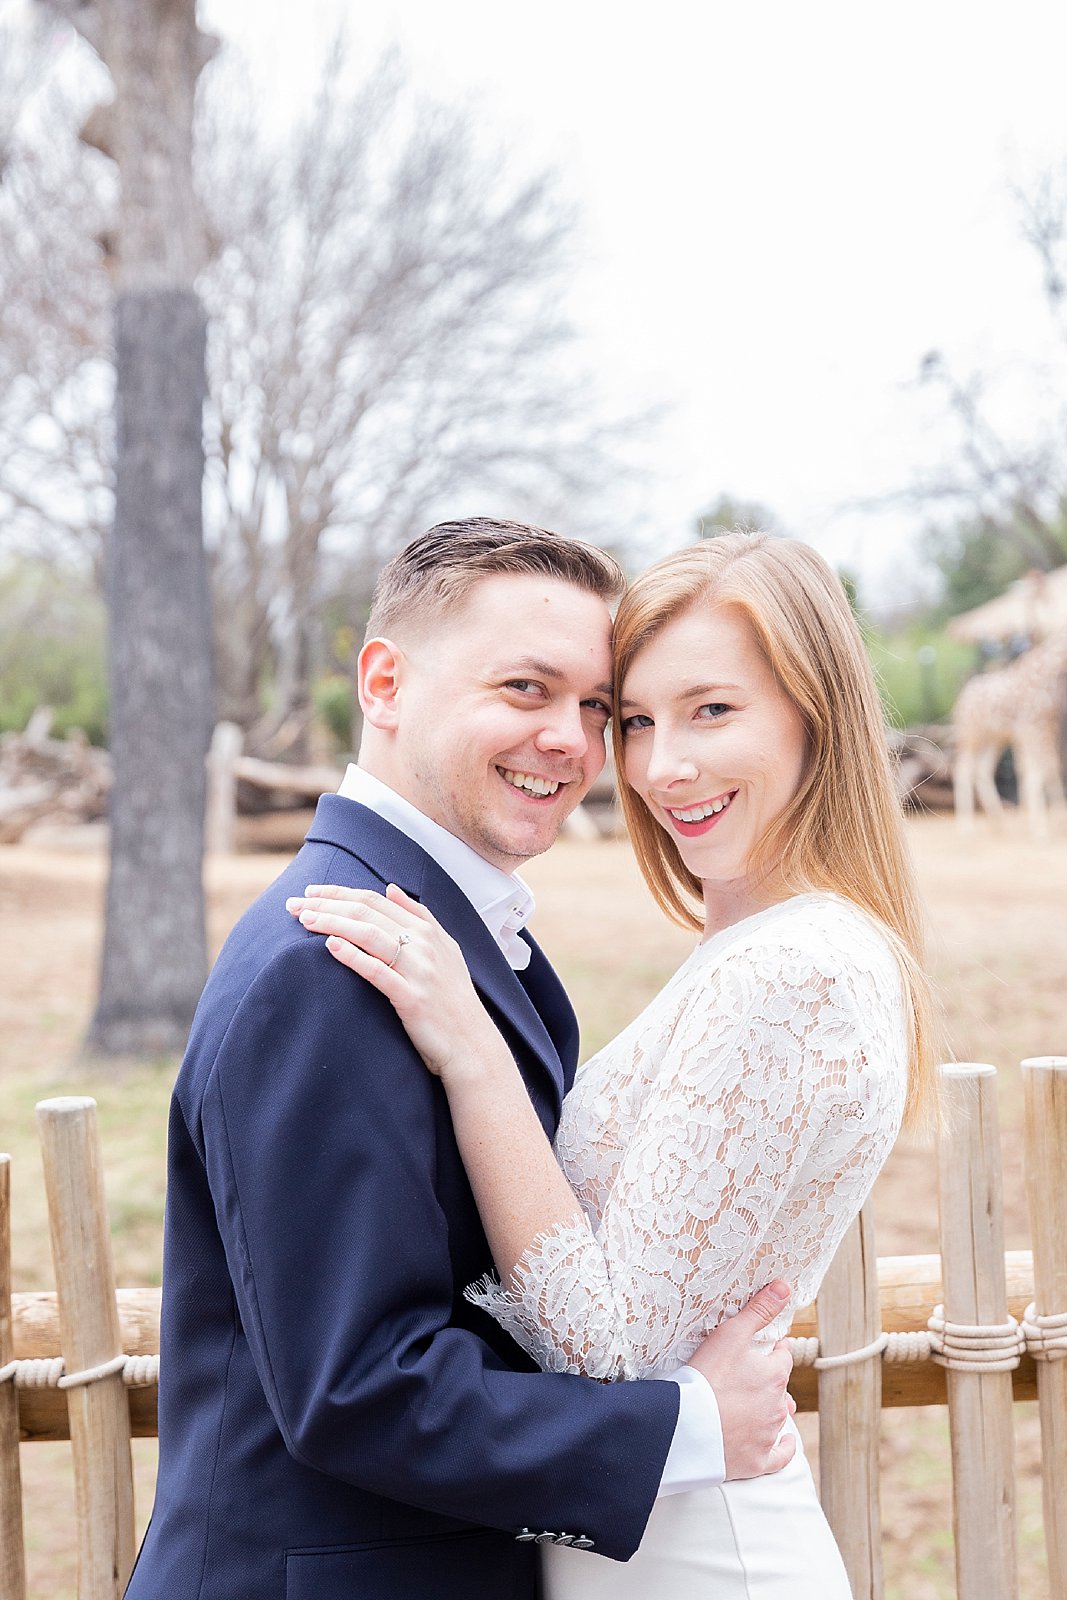 DFW Zoo engagement session with wedding photographer Randi Michelle Photography